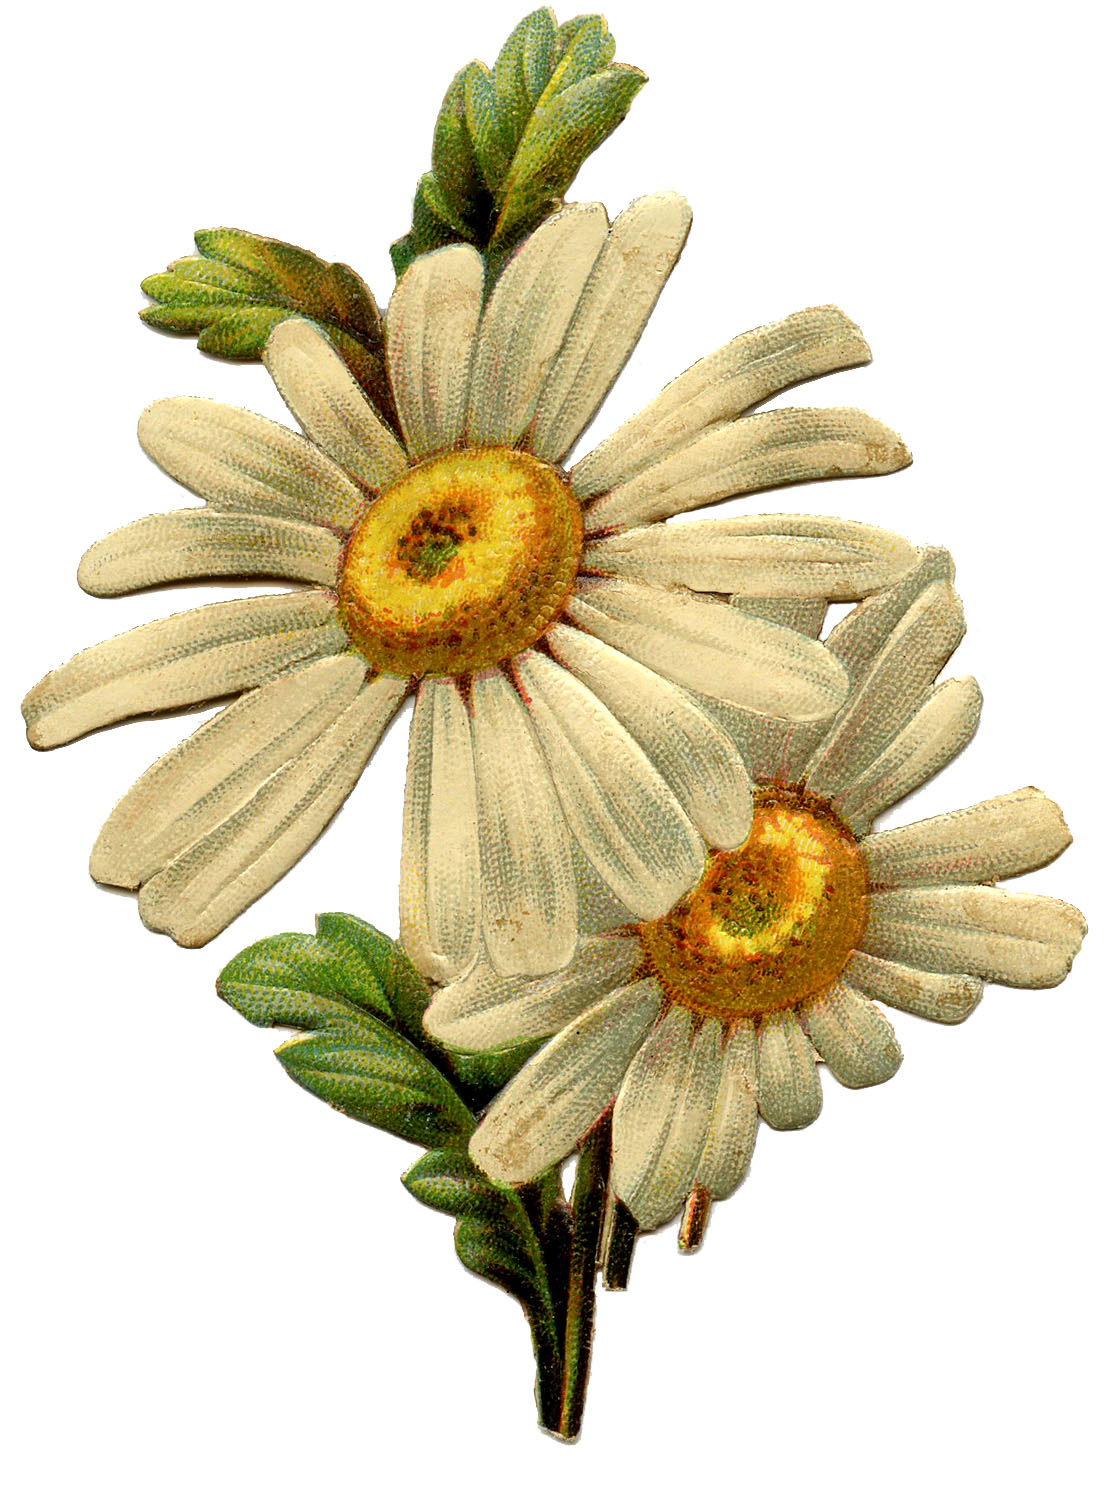 Vintage Daisy Image   The Graphics Fairy